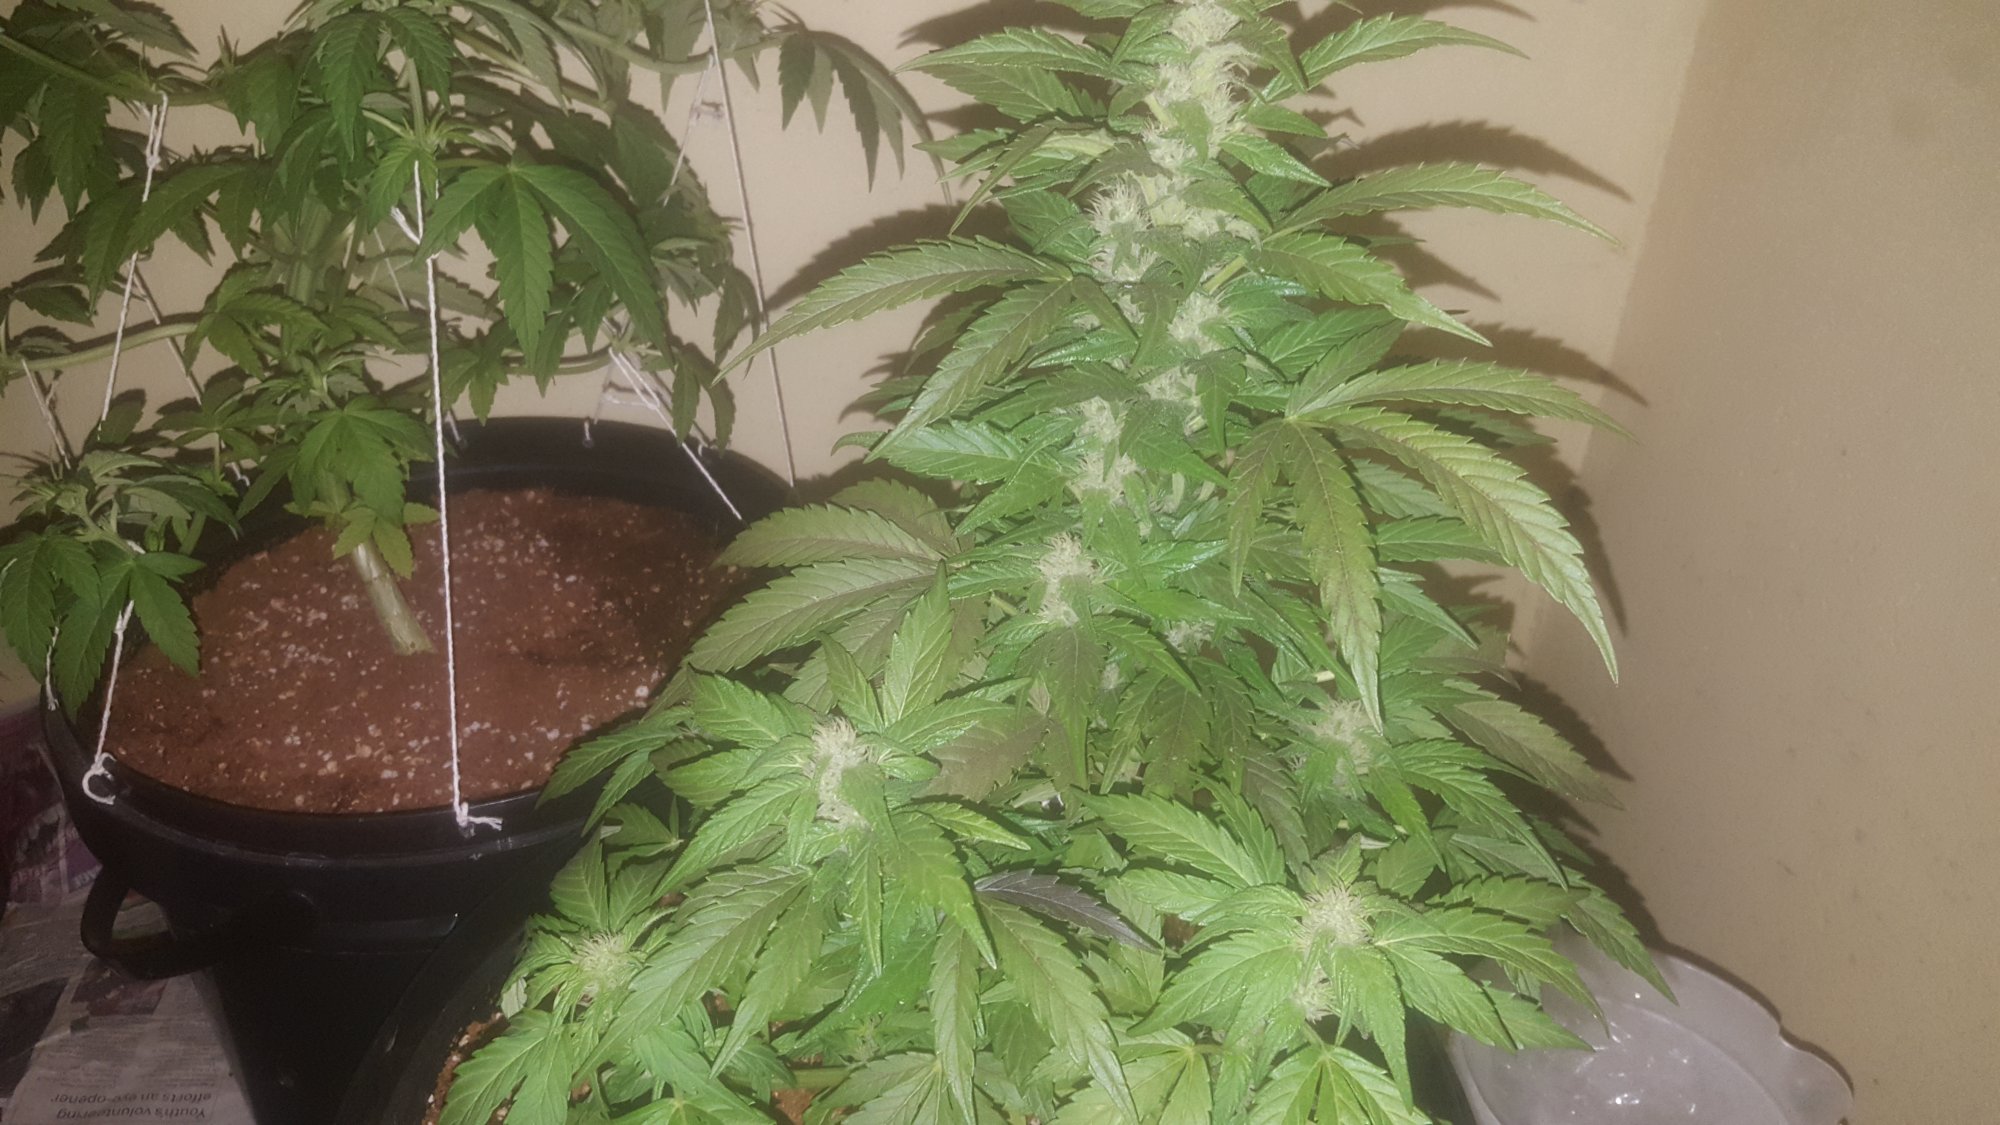 Day 79 from seedjust an update 5